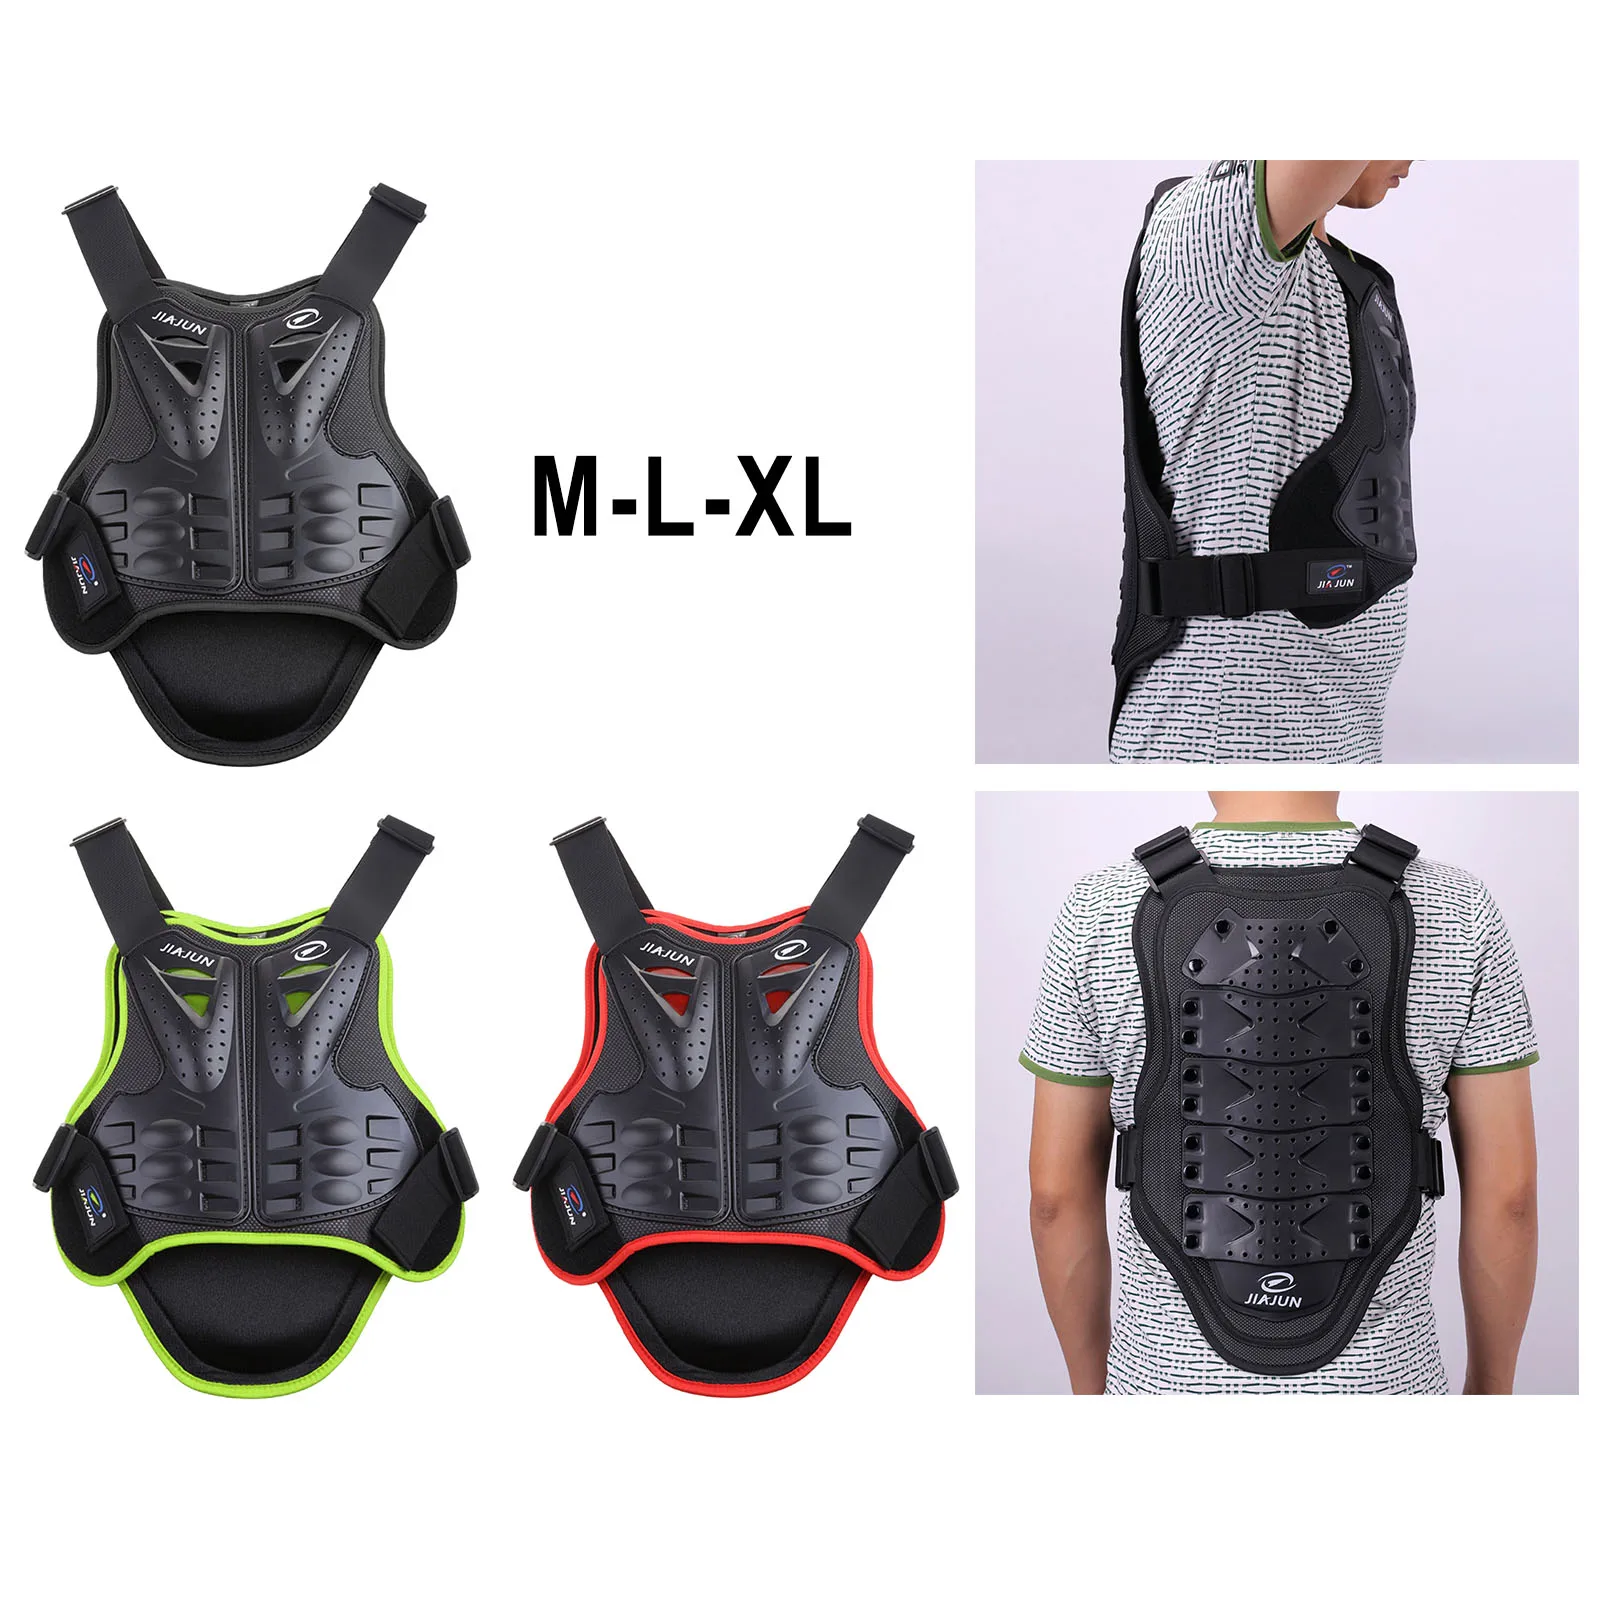 Motorcycle Protection Vest Spine Chest Protection Protective Gear for Motocross Snowboarding Mens Adult